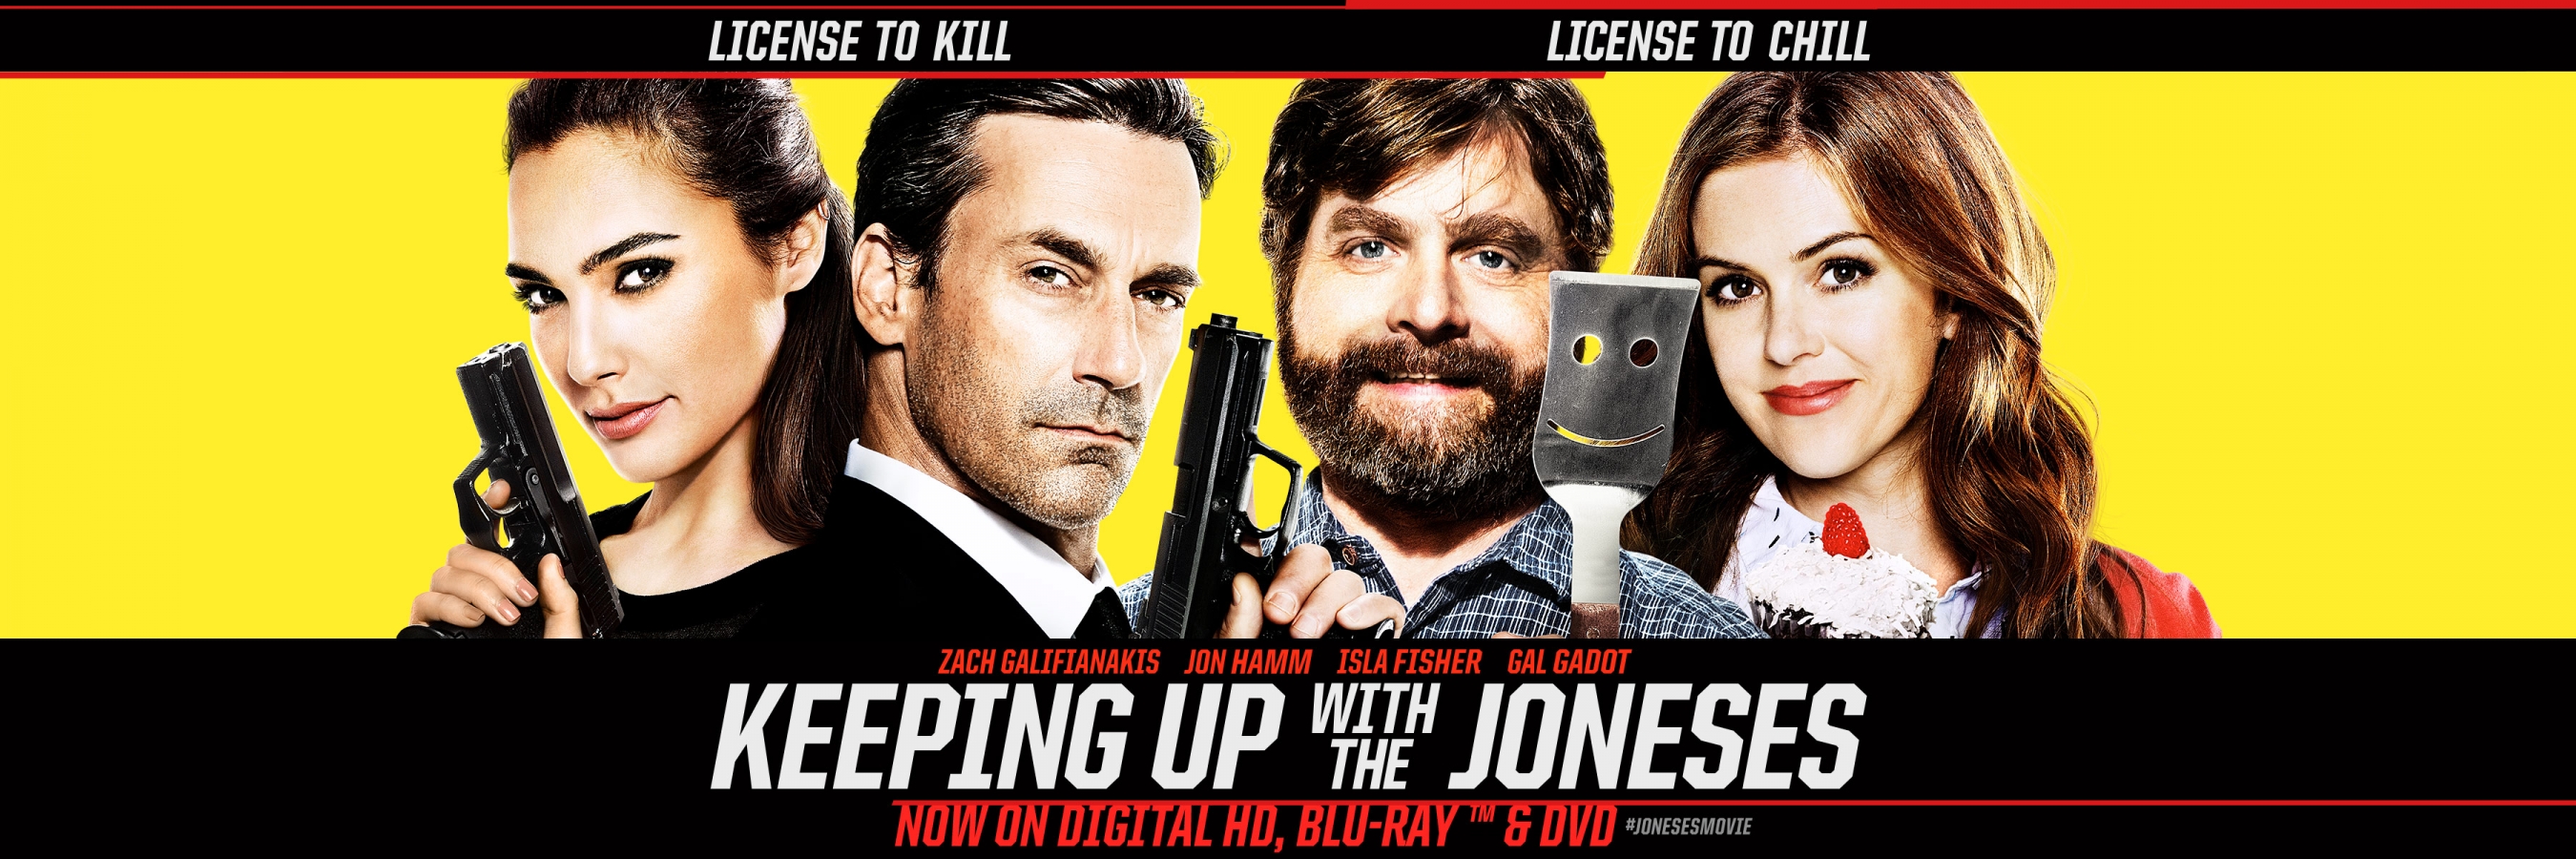 Keeping Up With The Joneses HD wallpapers, Desktop wallpaper - most viewed